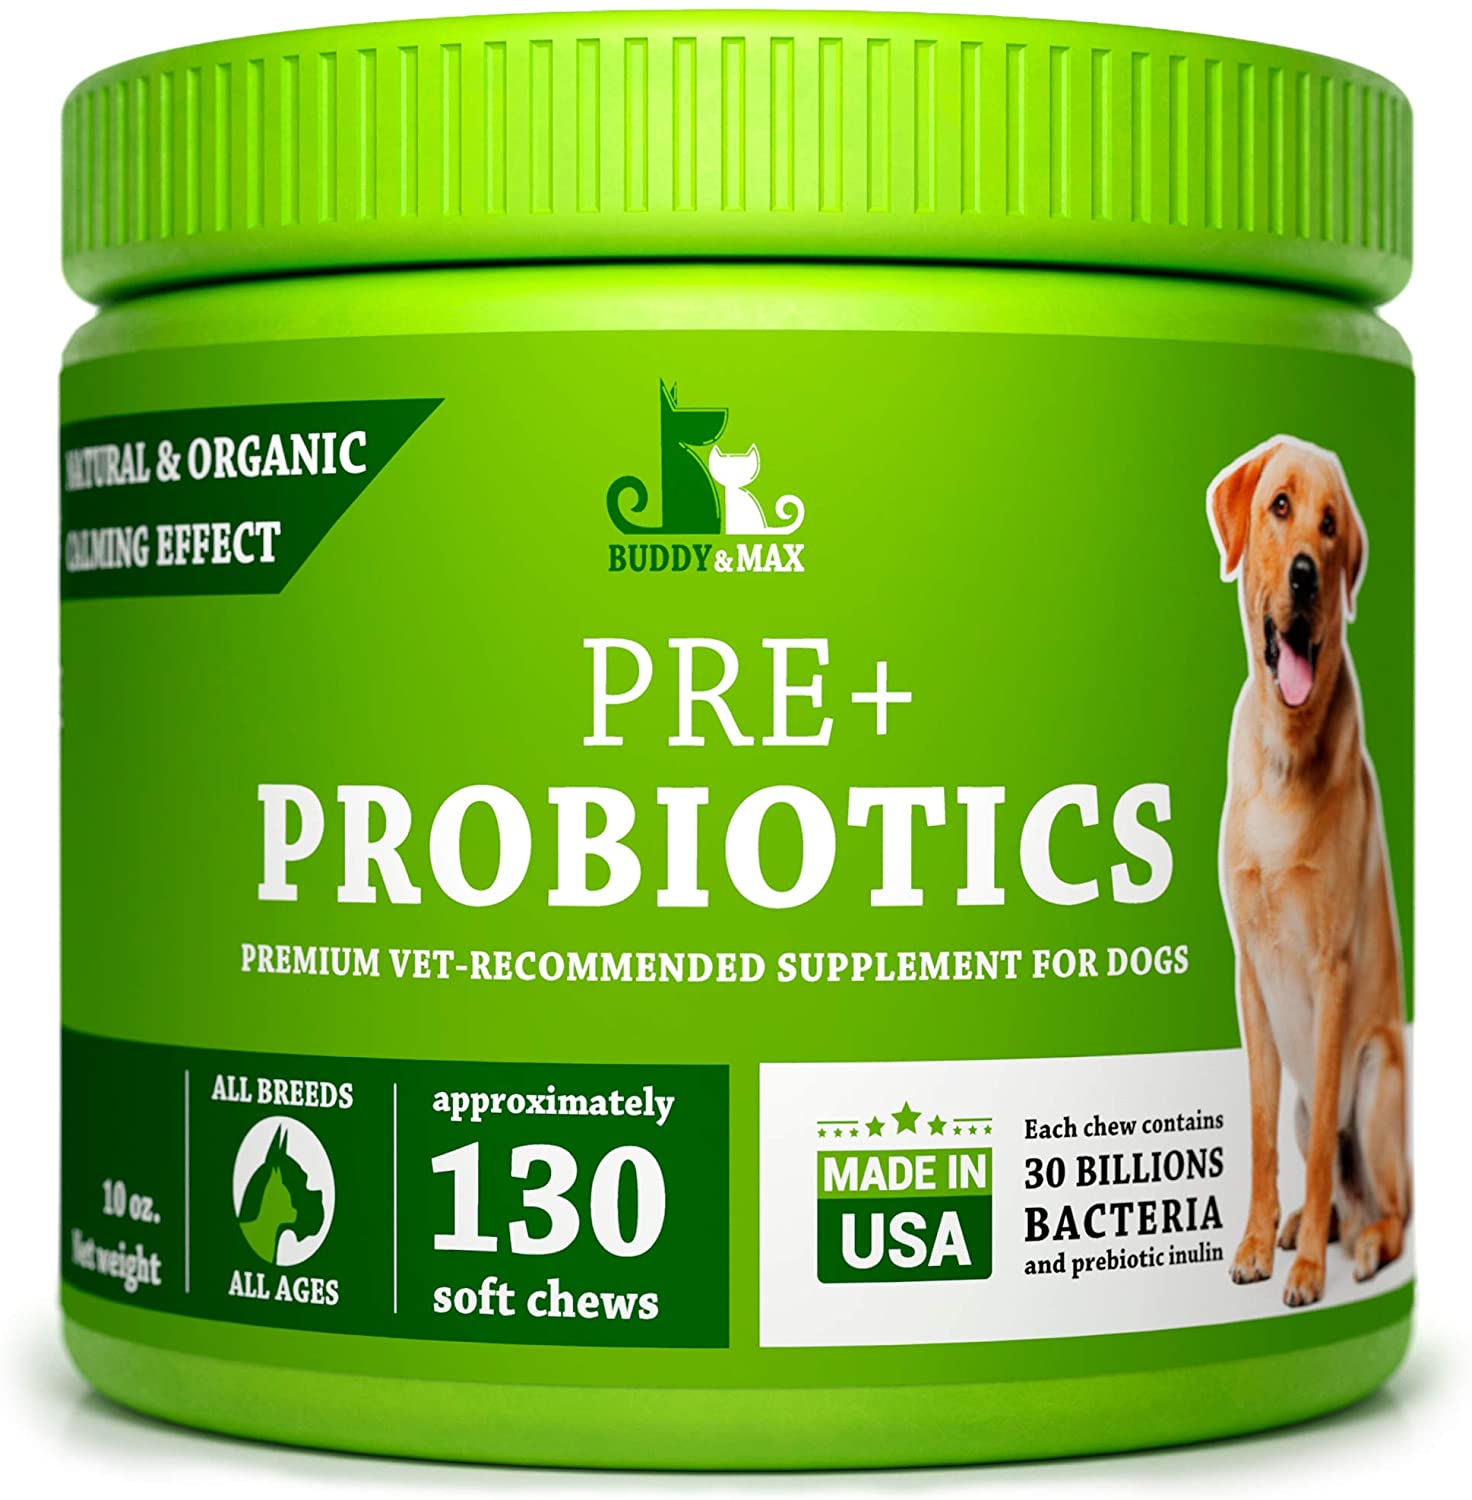 Buddy&Max Probiotics for Dogs